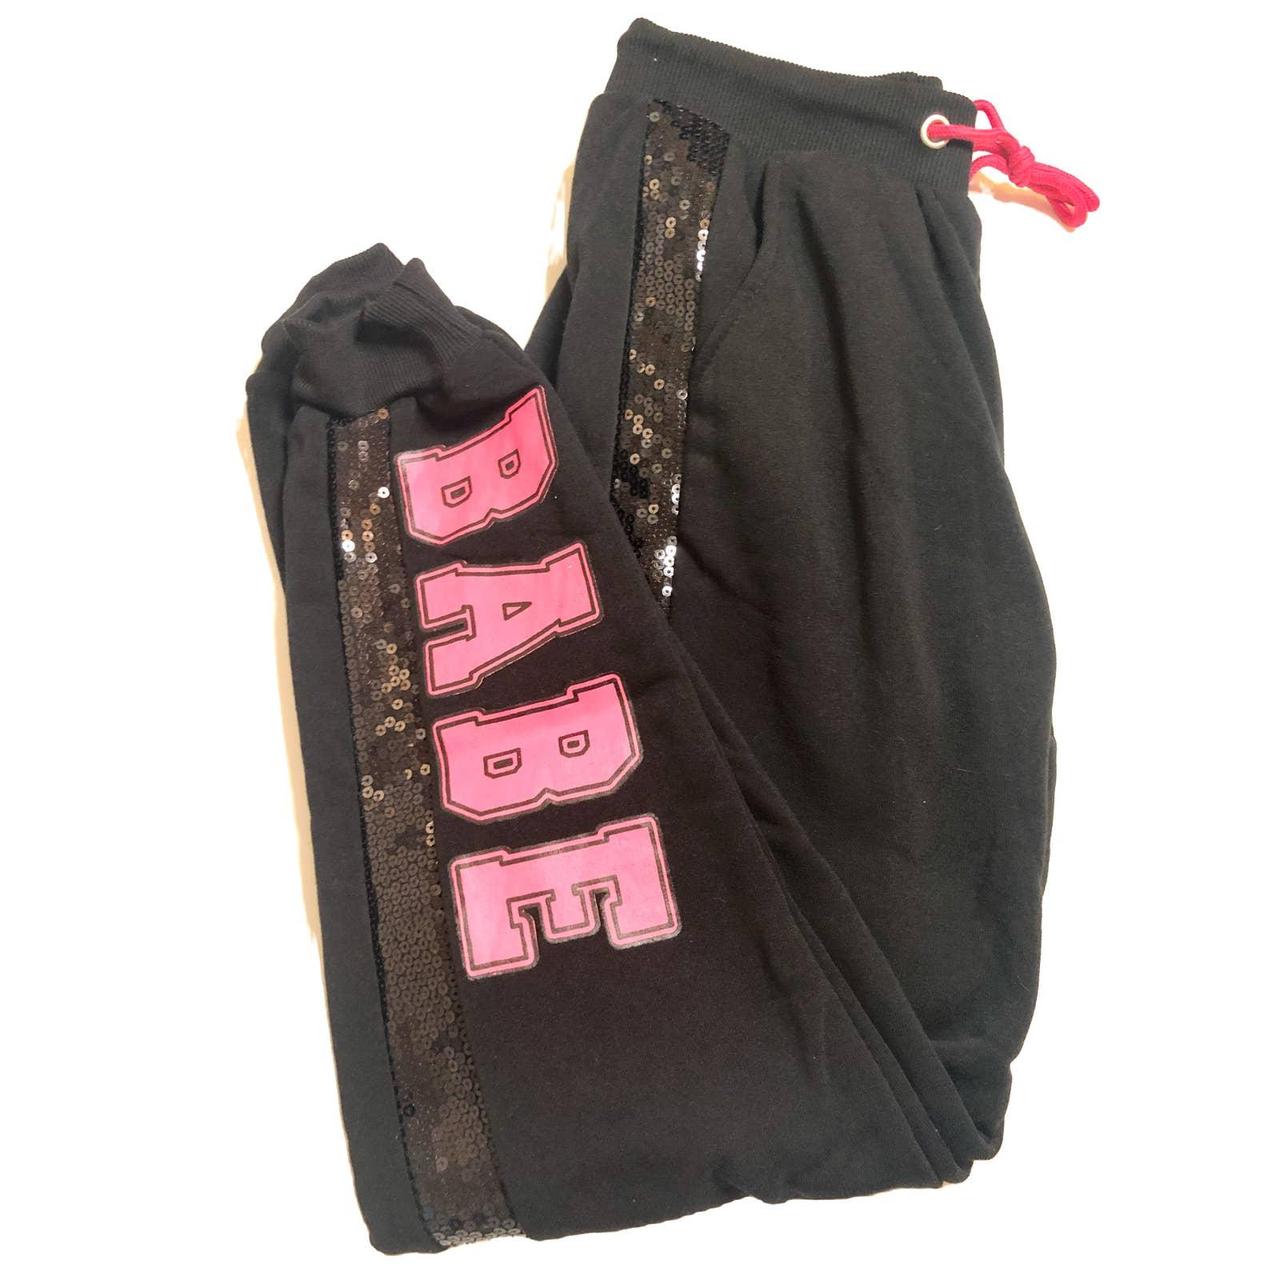 New Look Women's Black and Pink Jeans